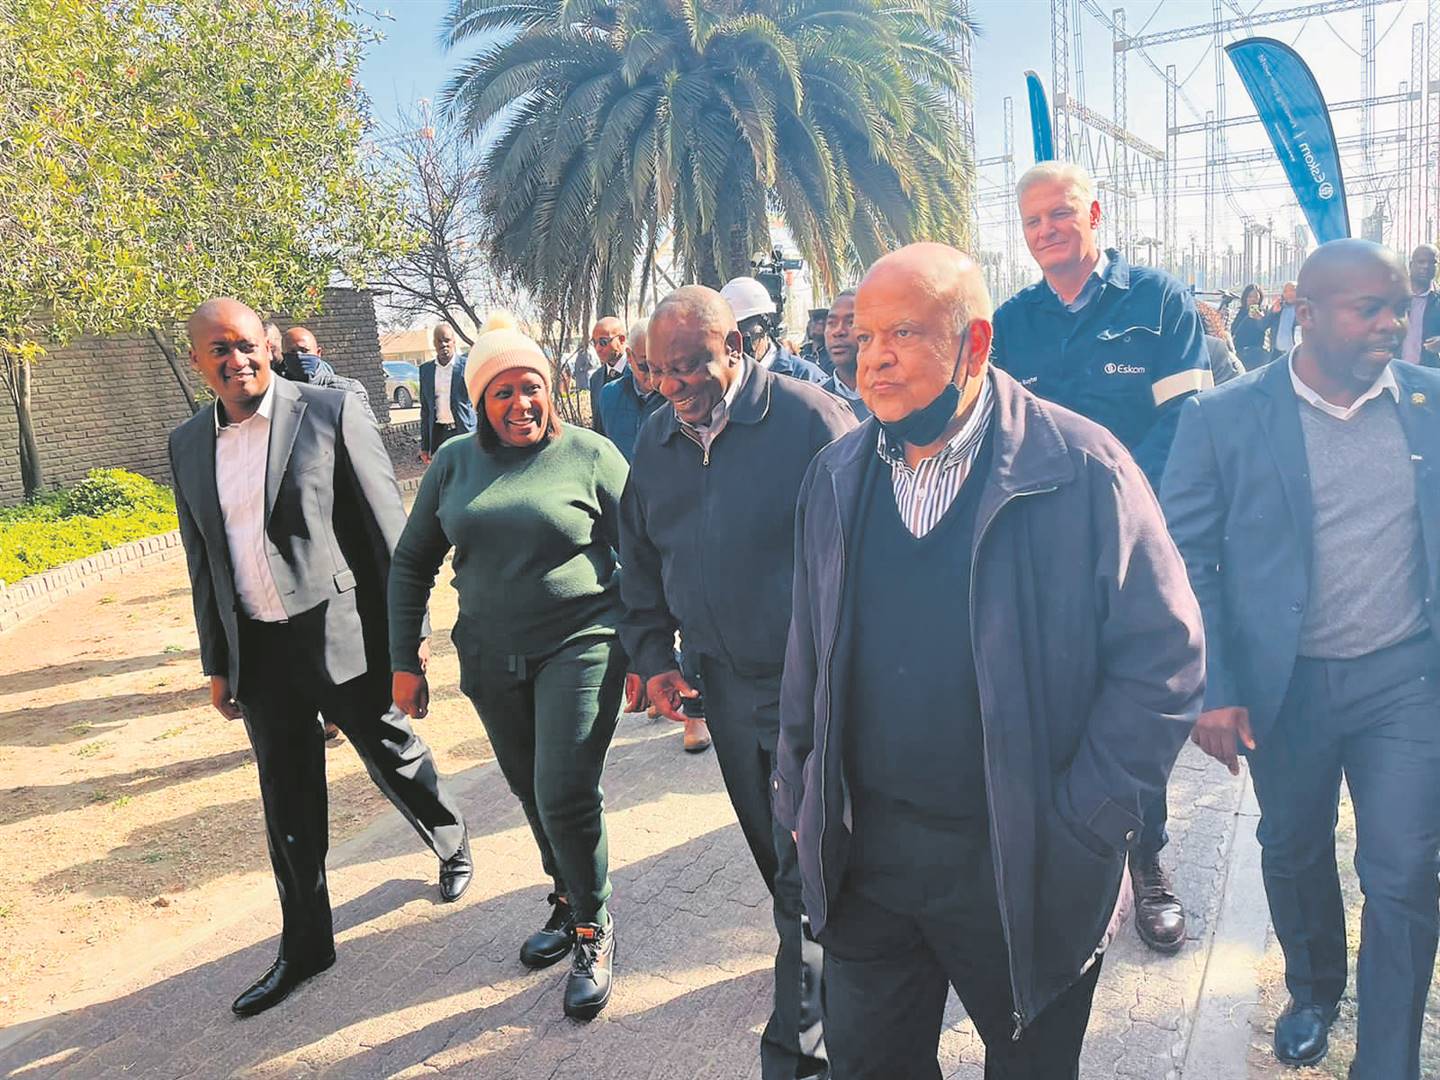 President Cyril Ramaphosa with Mpumalanga Premier Refilwe Mtsweni- Tsipane (second from left), Eskom CEO Andre de Ruyter and Minister Pravin Gordhan during a visit to Tutuka Power Station in Standerton.  